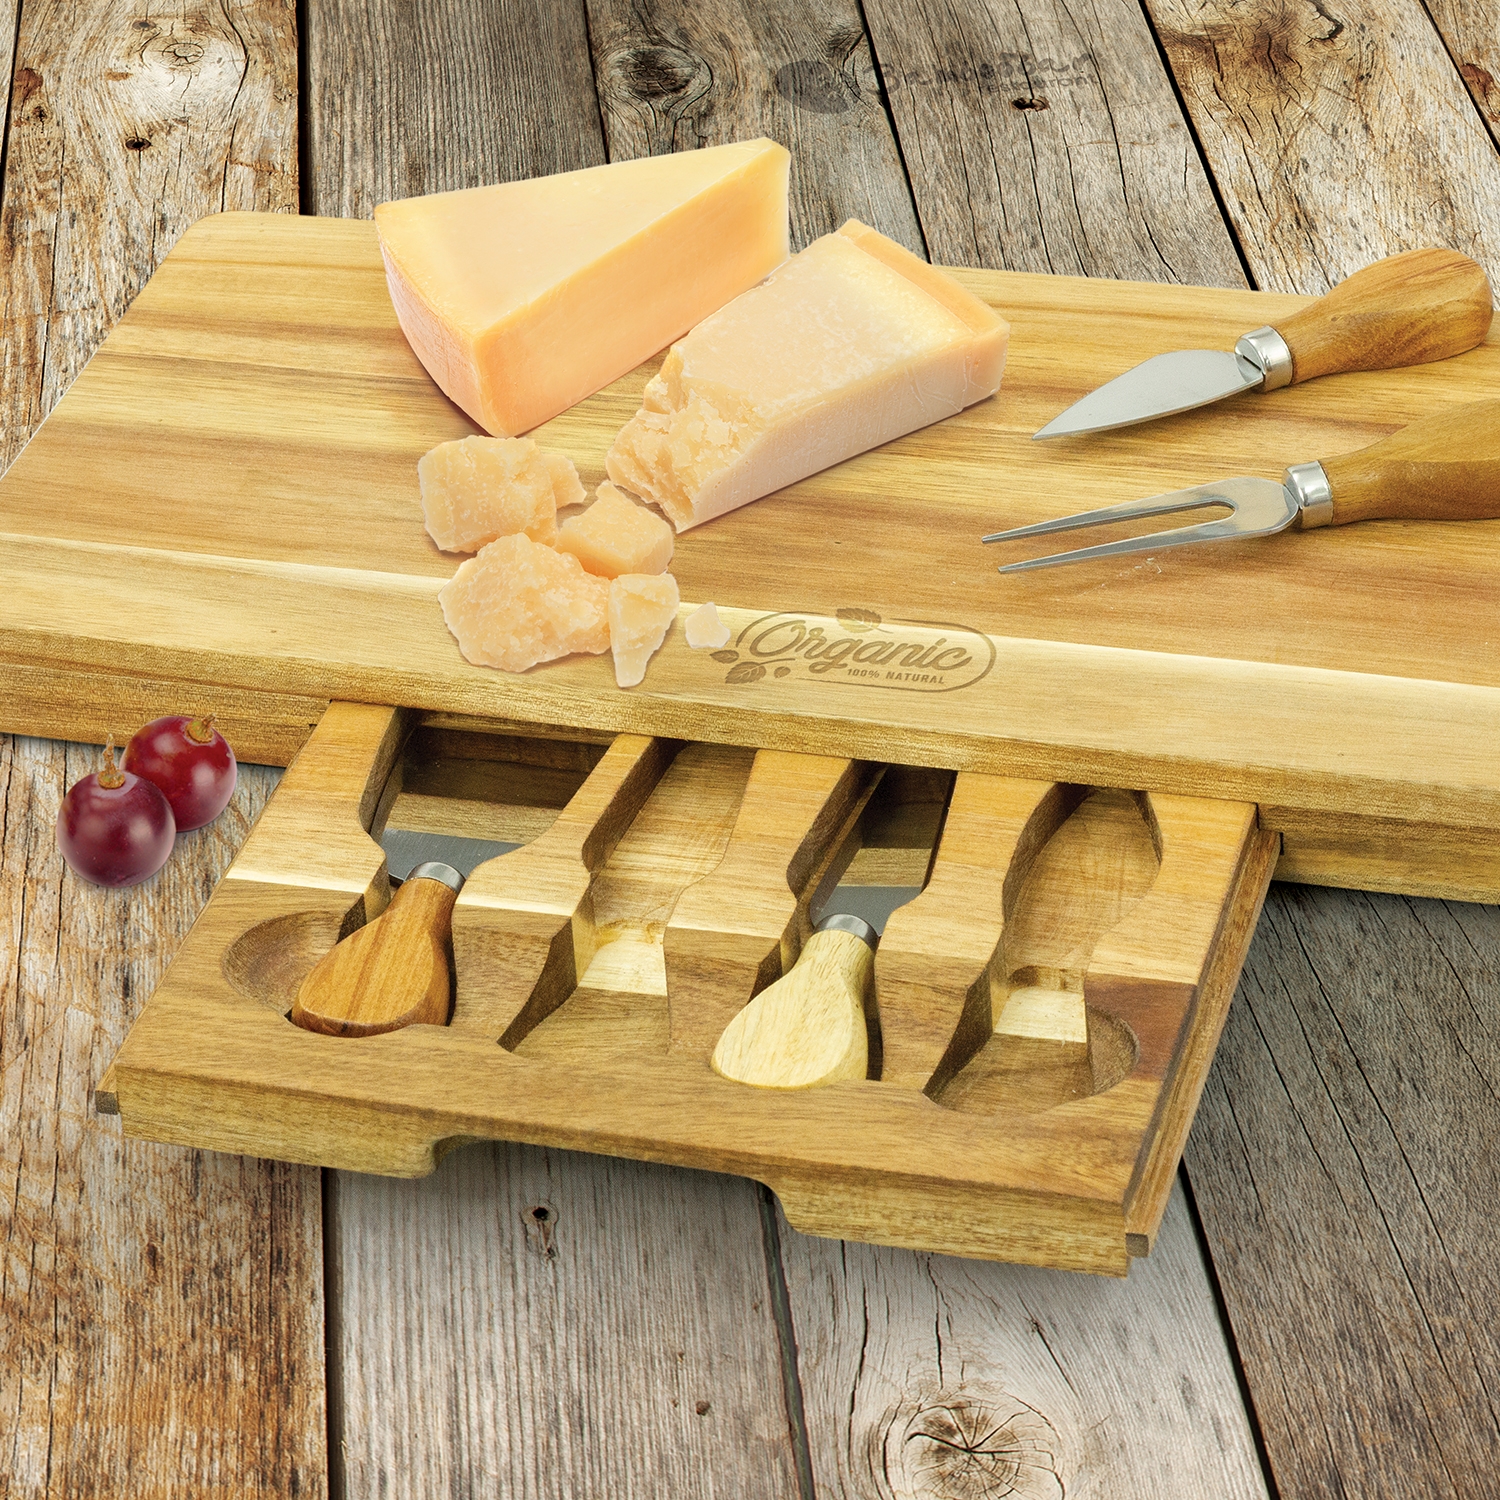 Montgomery Cheese Board Features